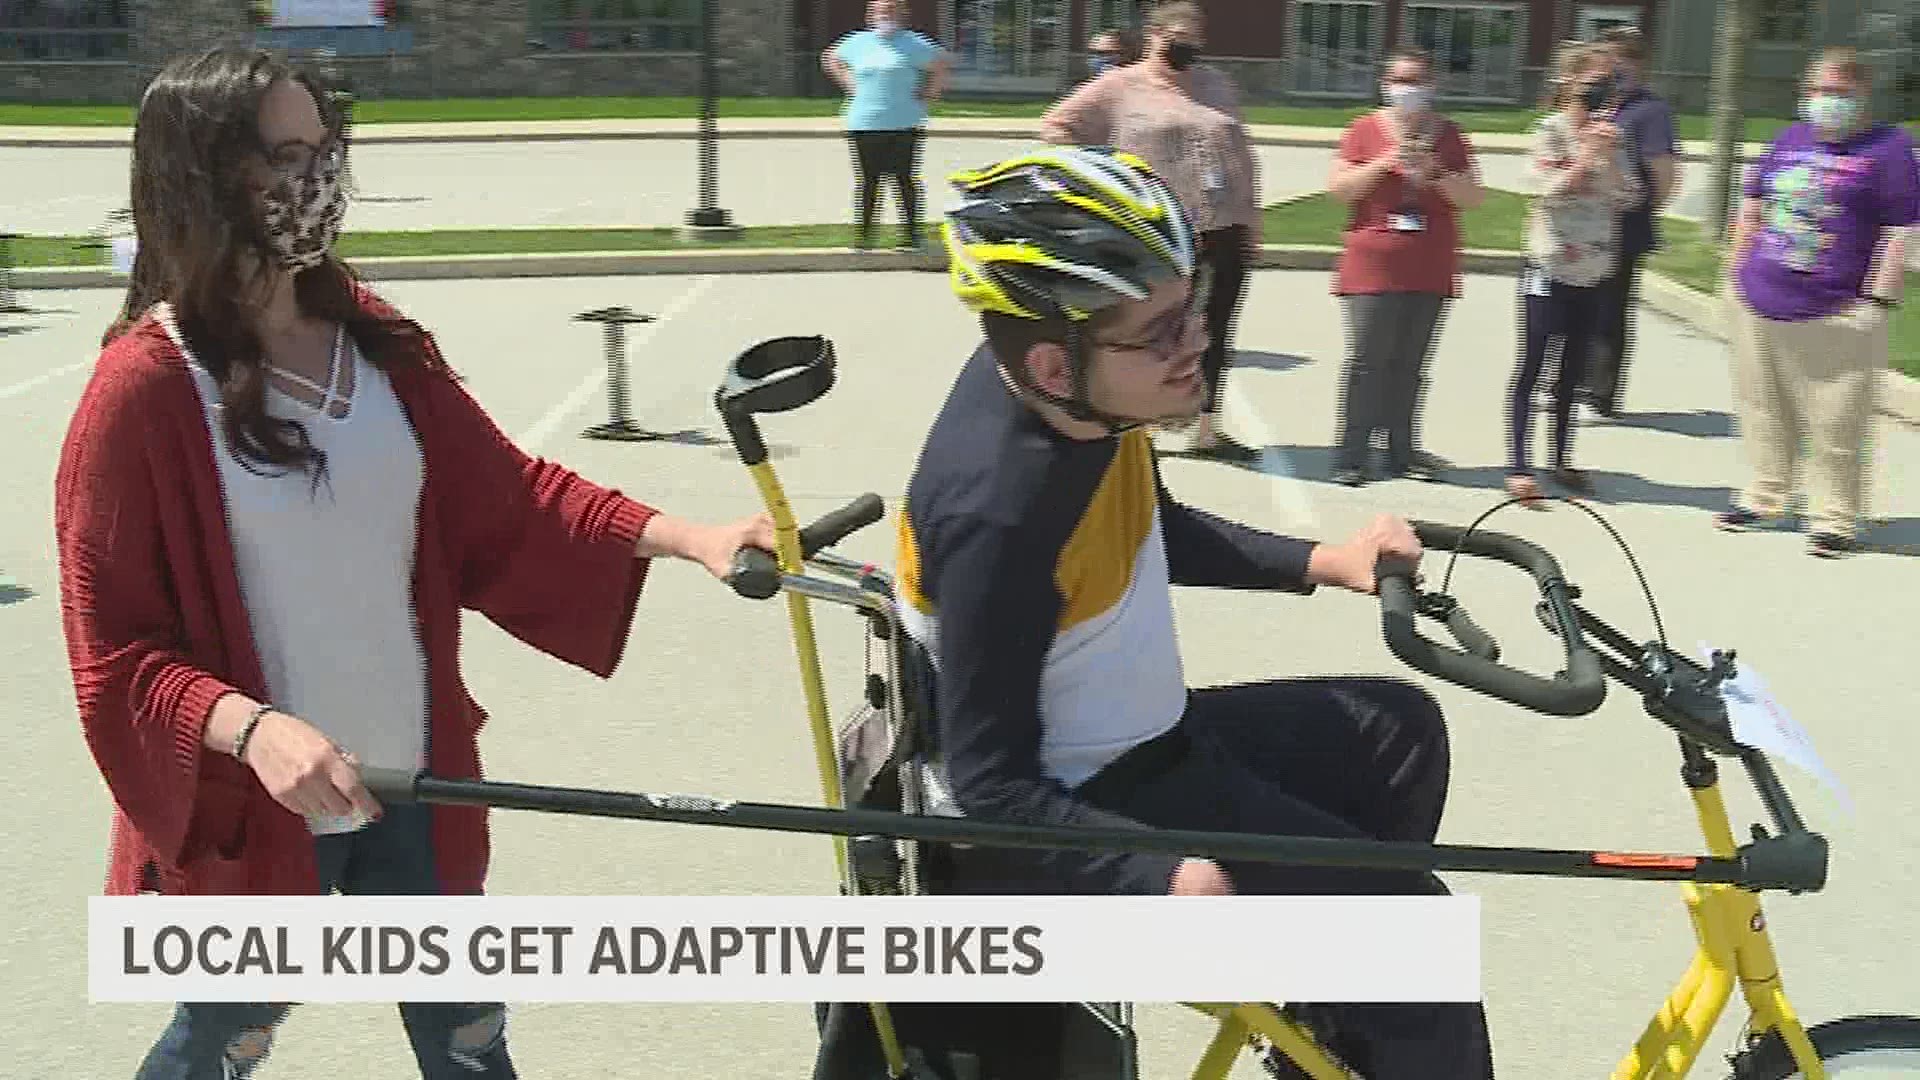 Local groups teamed up to give adaptive bikes for kids with disabilities.